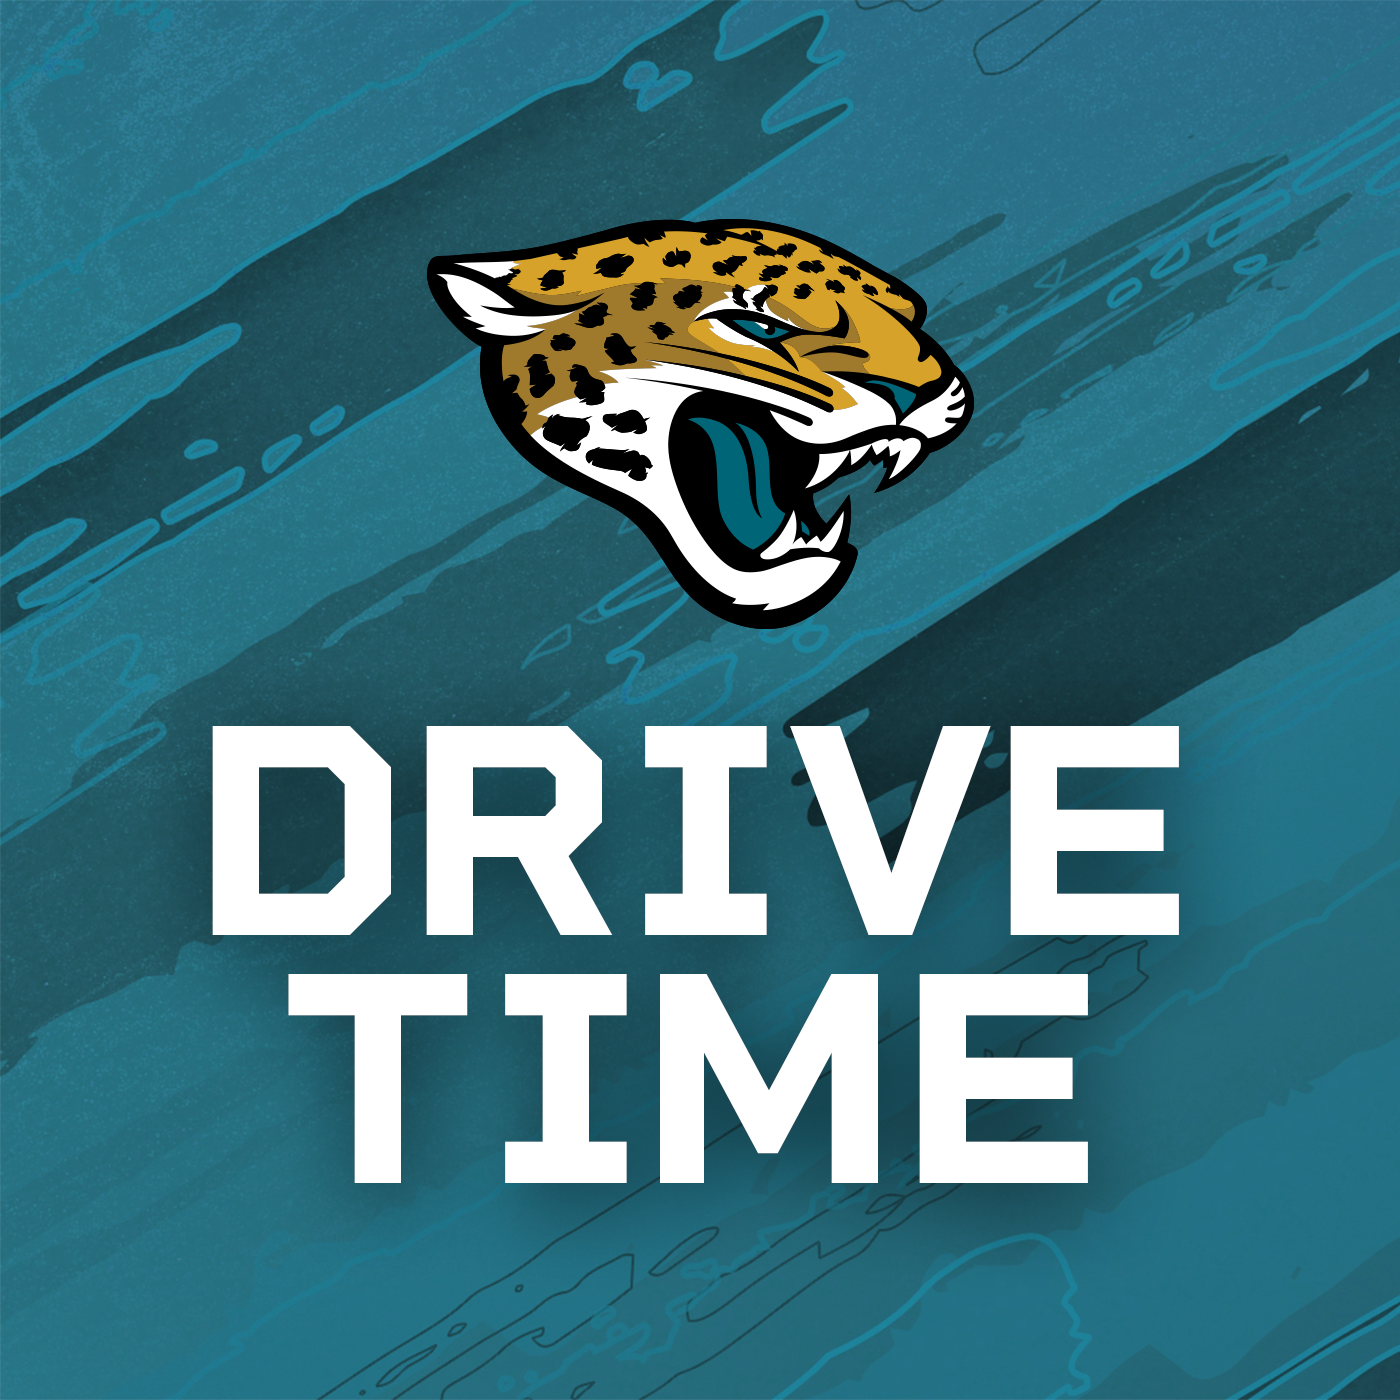 Importance of continuity heading into 2023 | Jags Drive Time: Wednesday, January 25